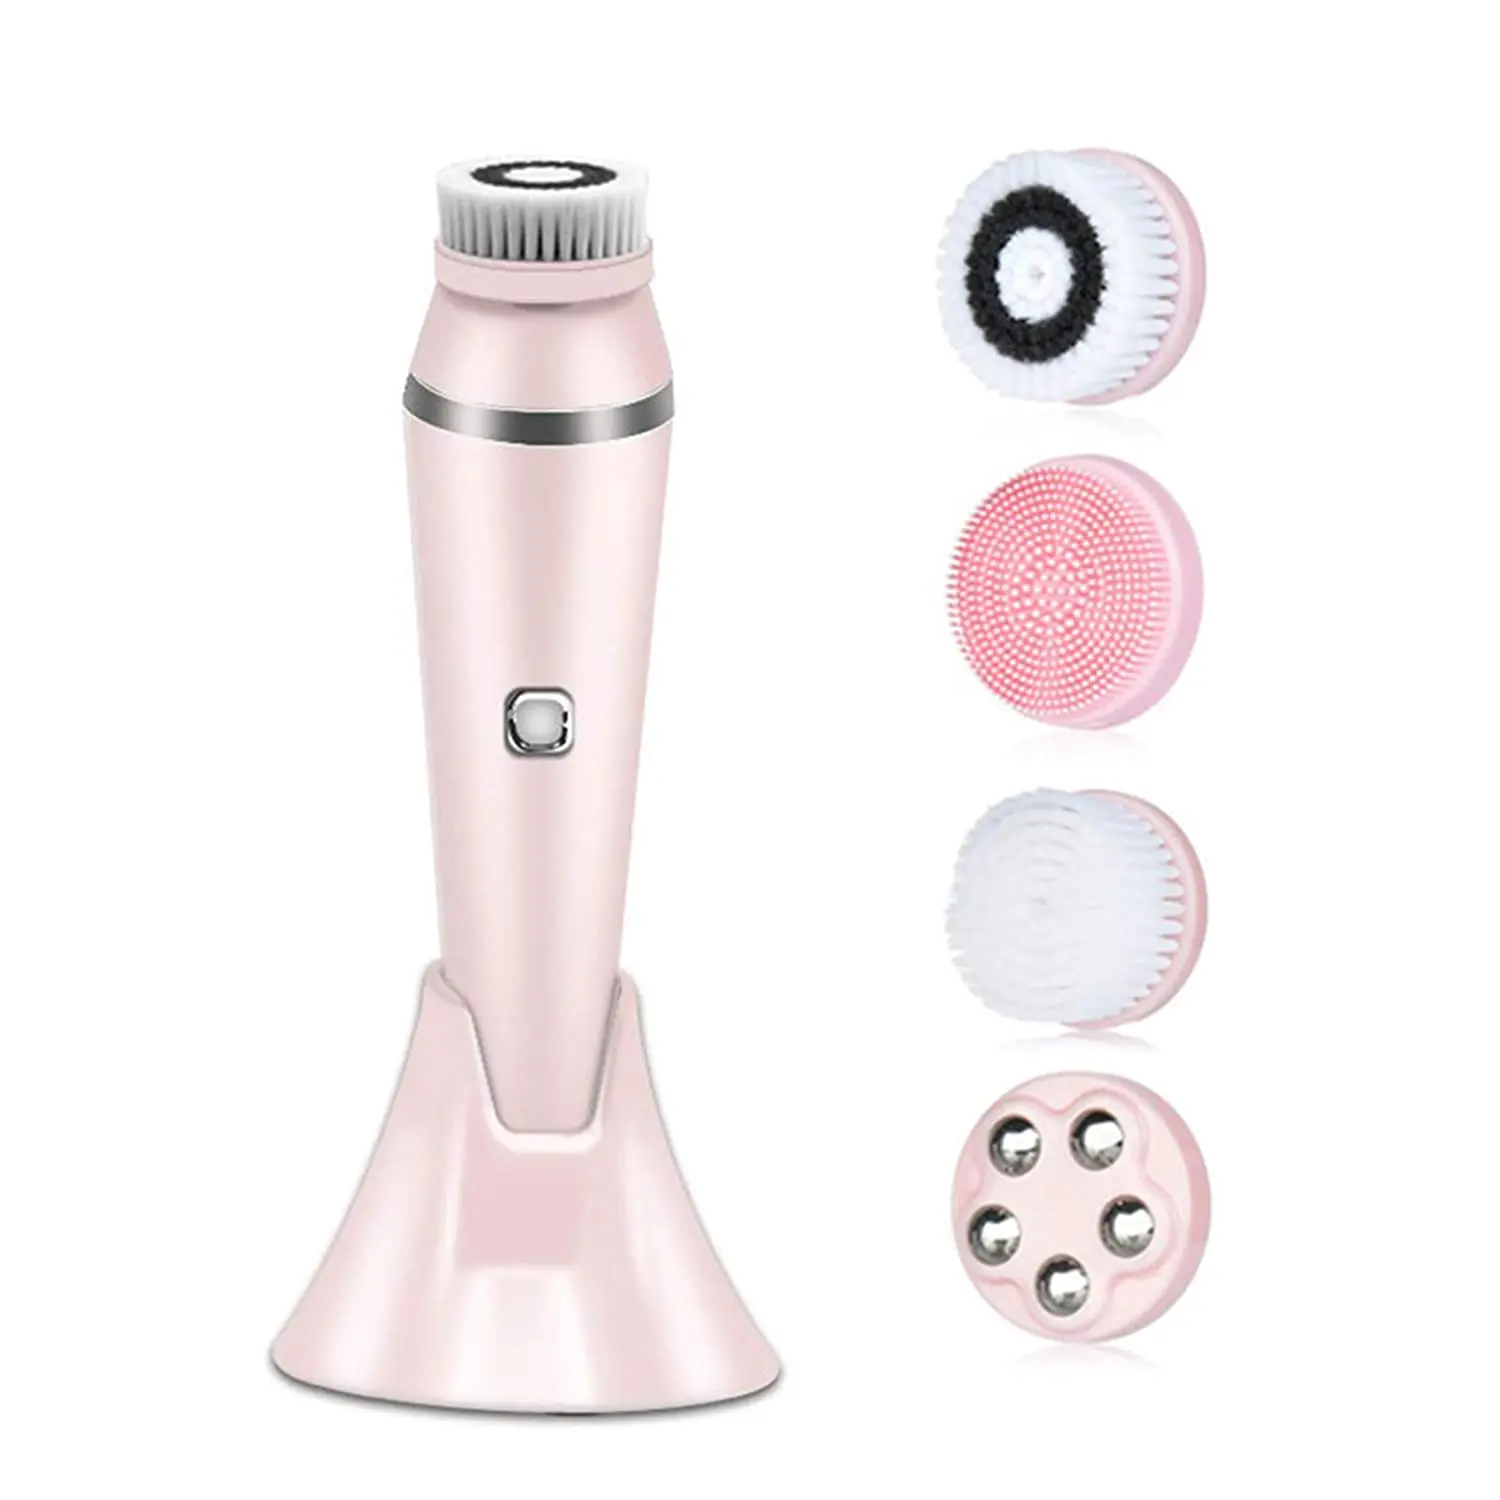 

360 Degree Bidirectional Rotation Deep Cleaning Electric Exfoliator Facial Brush Set With 4 Brush Heads